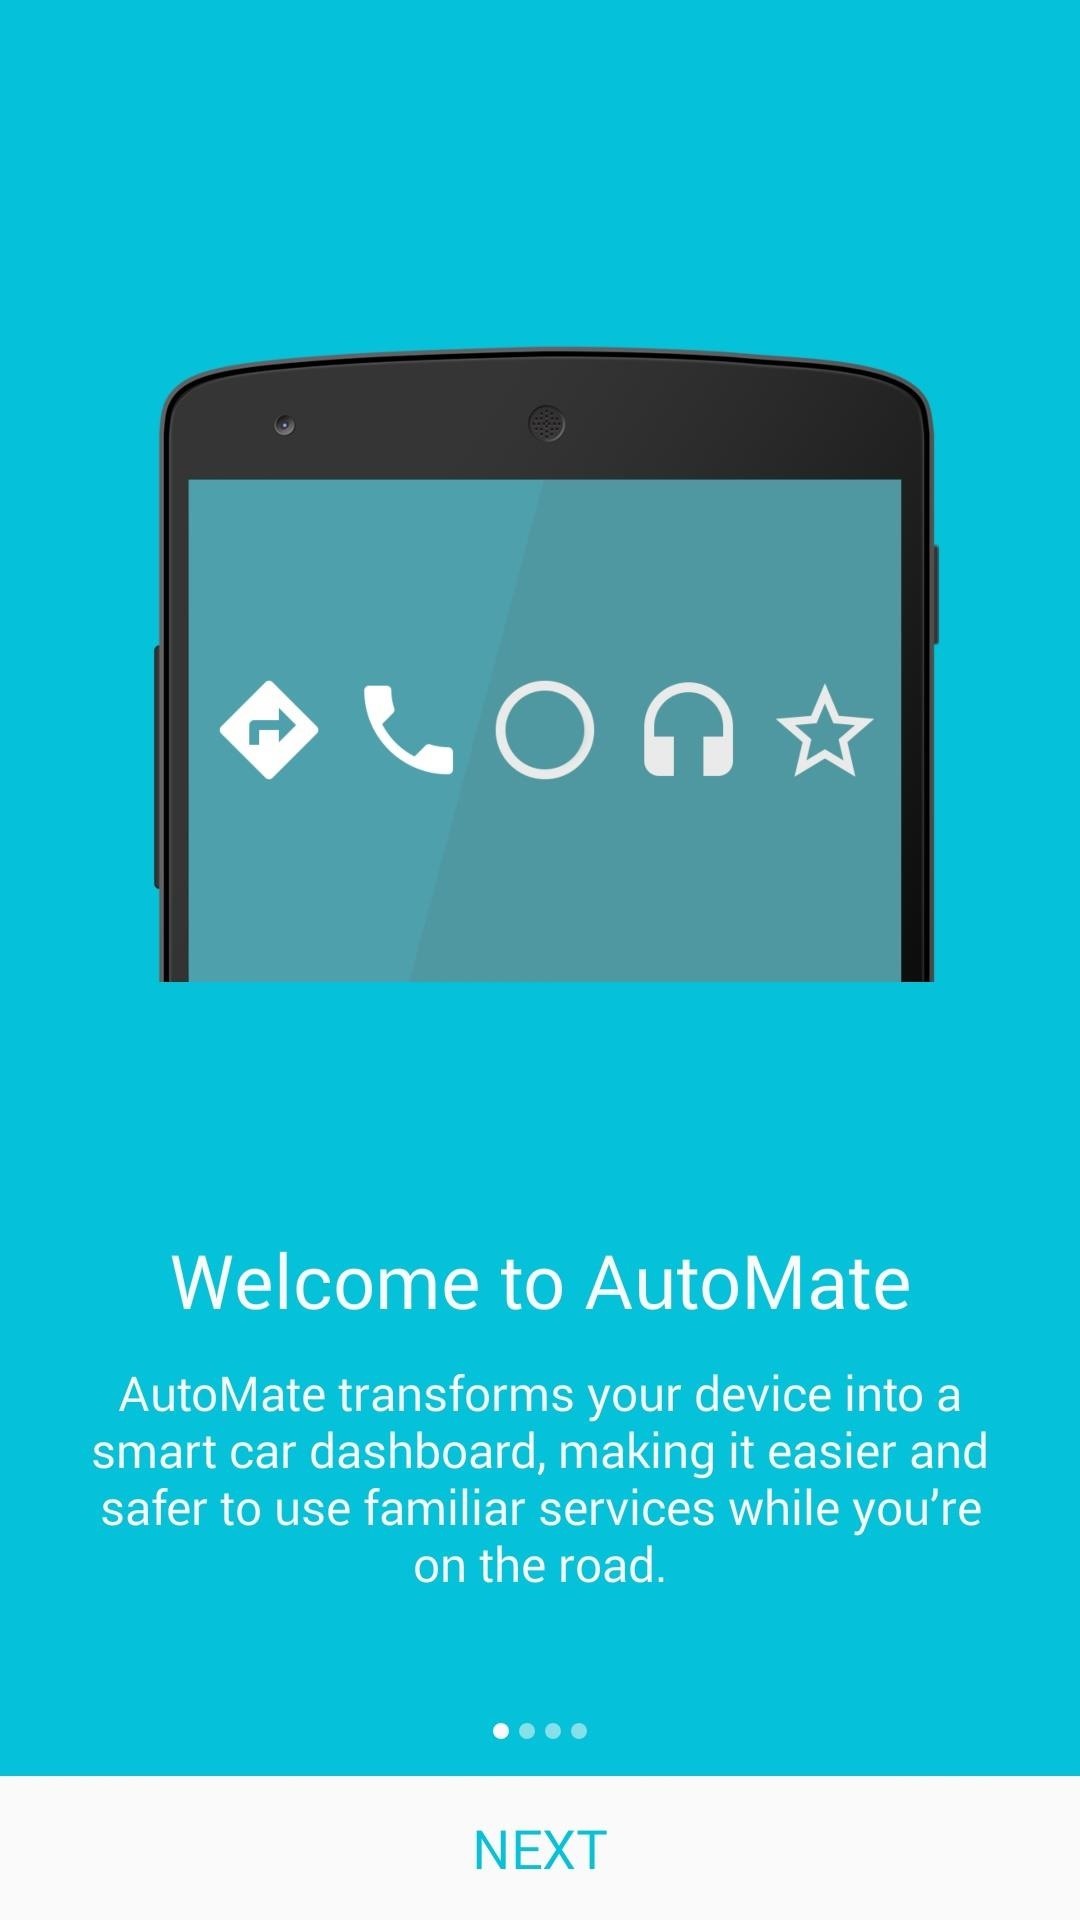 How to Turn Your Device into an Android Auto Clone